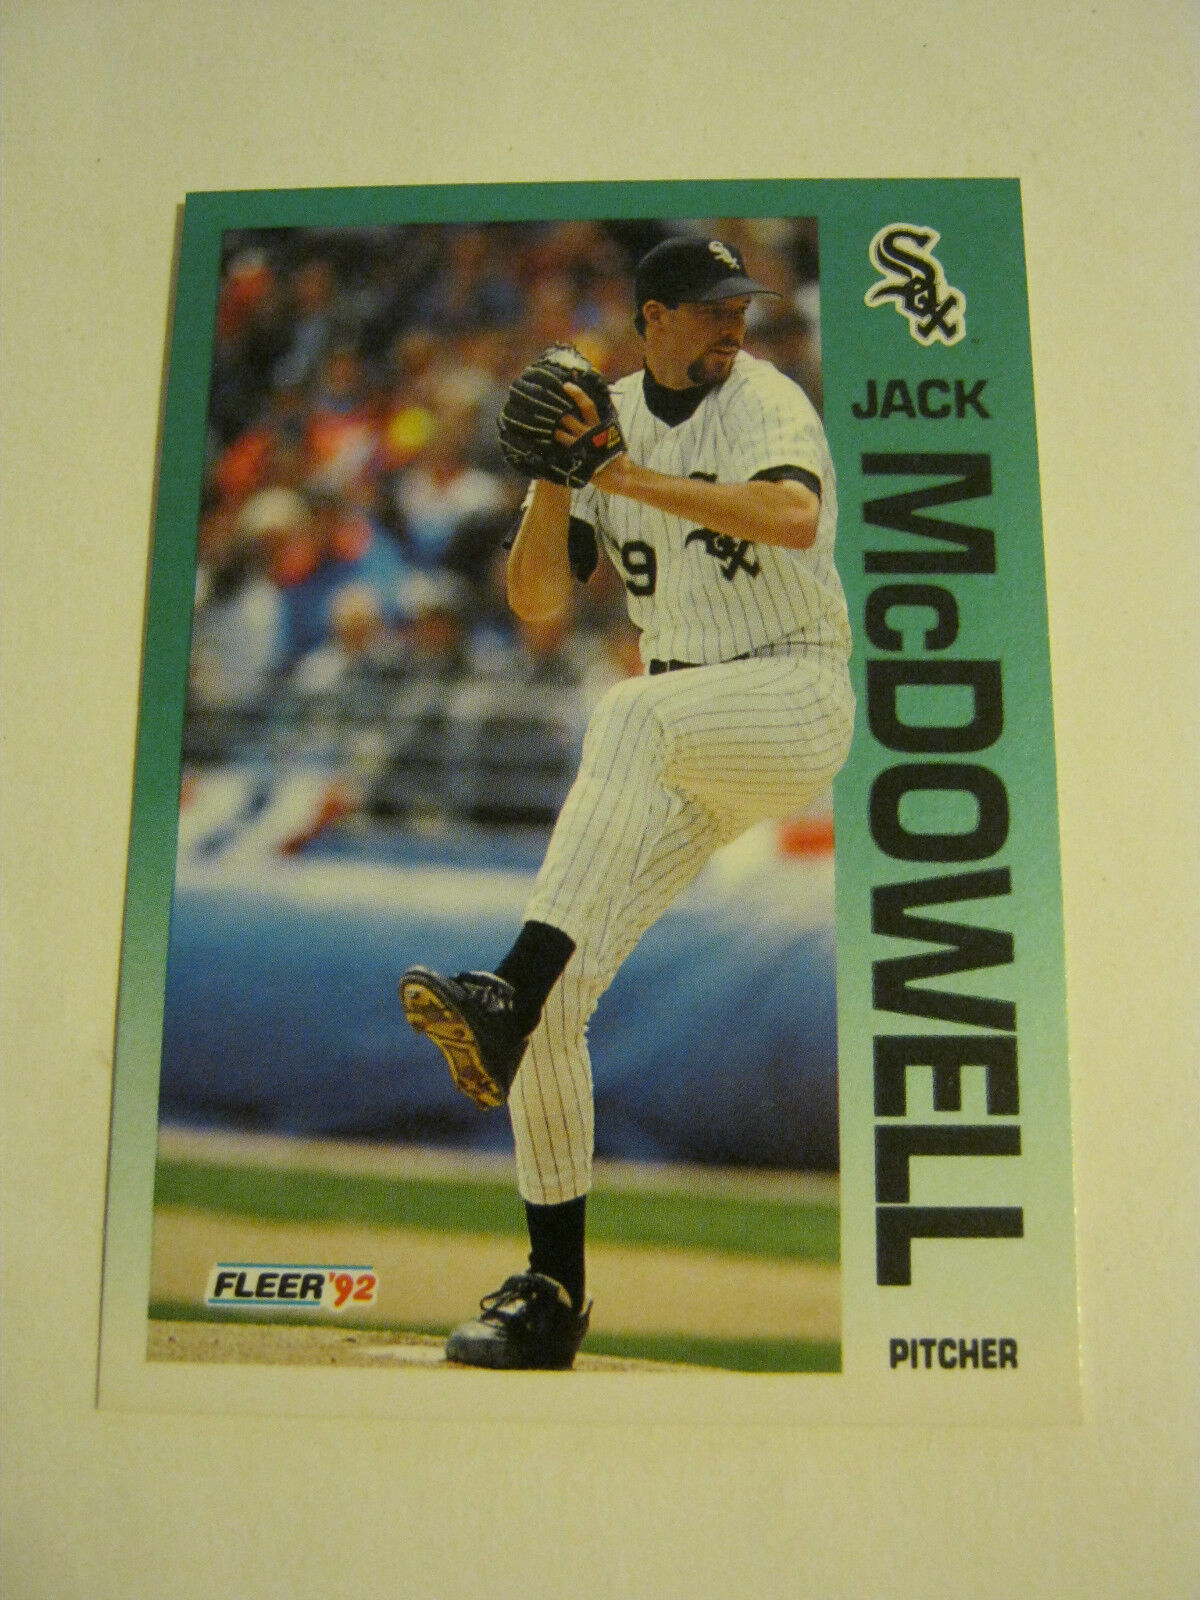 1992 Fleer #89 Jack McDowell Baseball Card, Excellent condition (EB1-29)